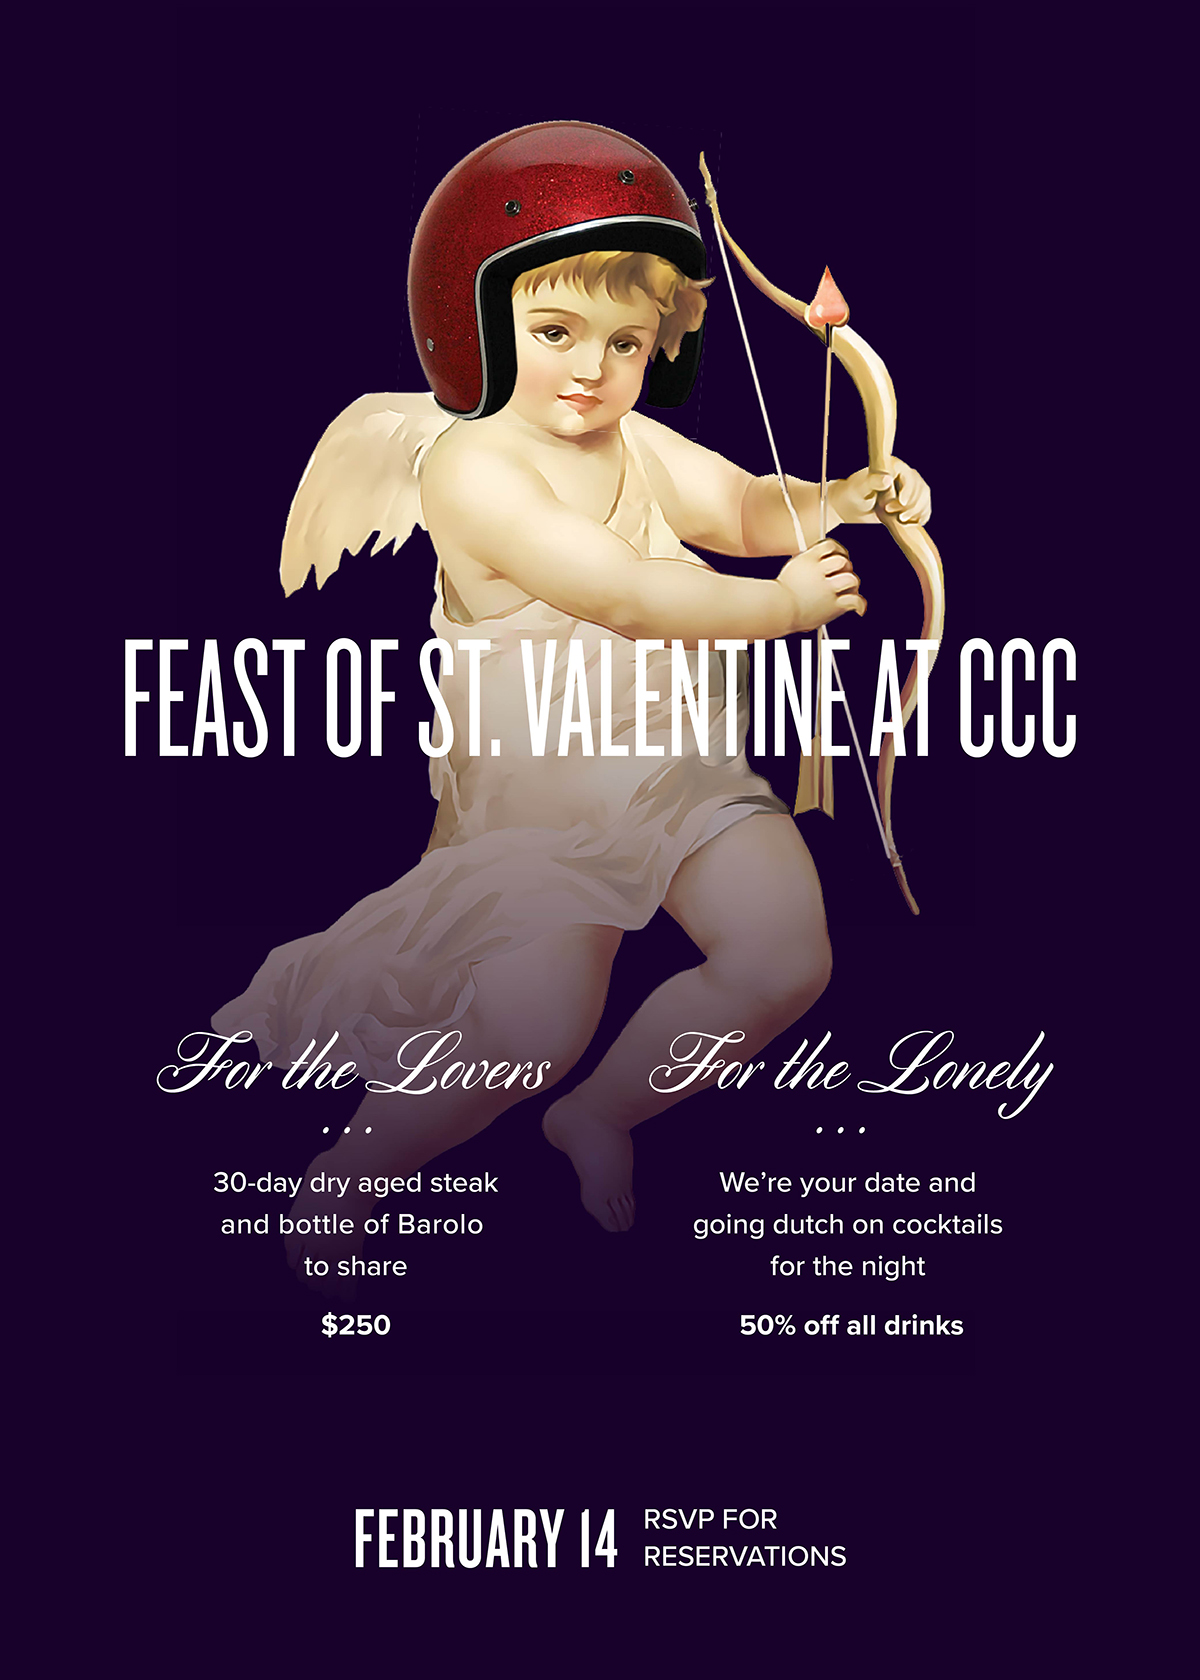 Feast of St. Valentine at CCC